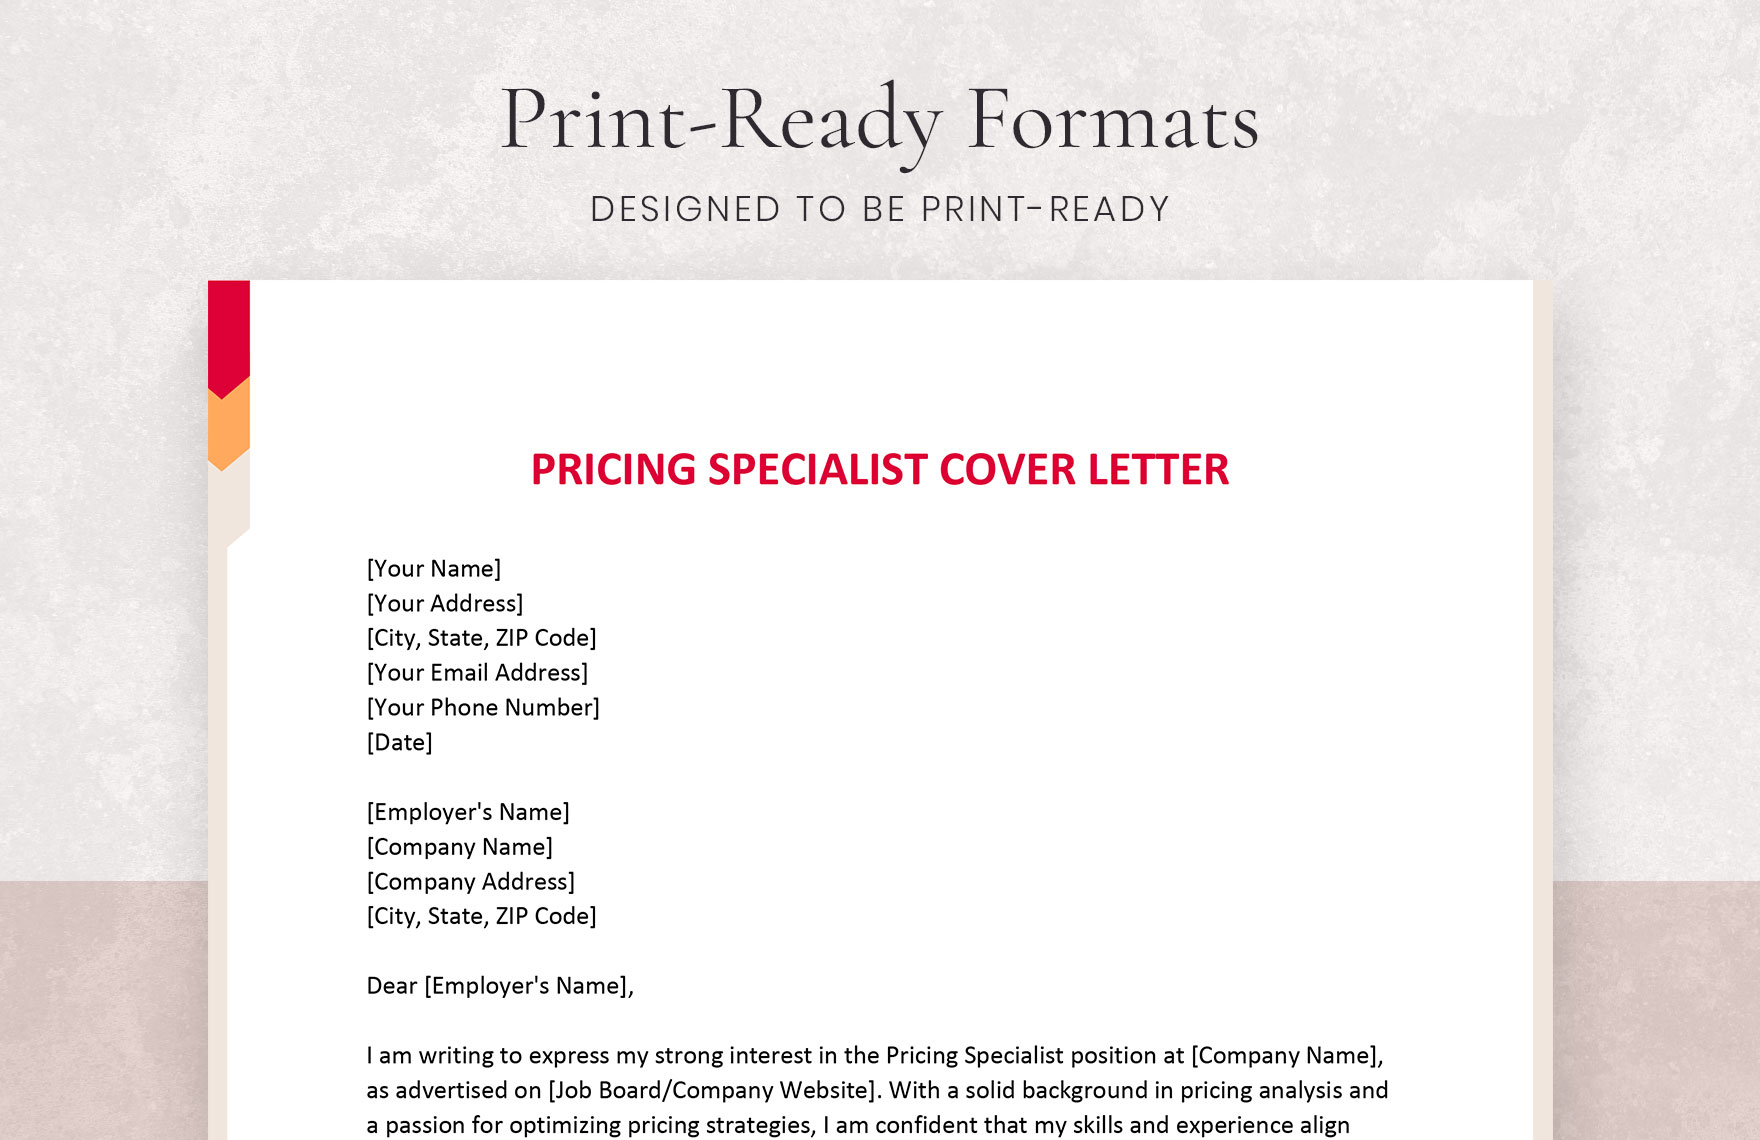 Pricing Specialist Cover Letter